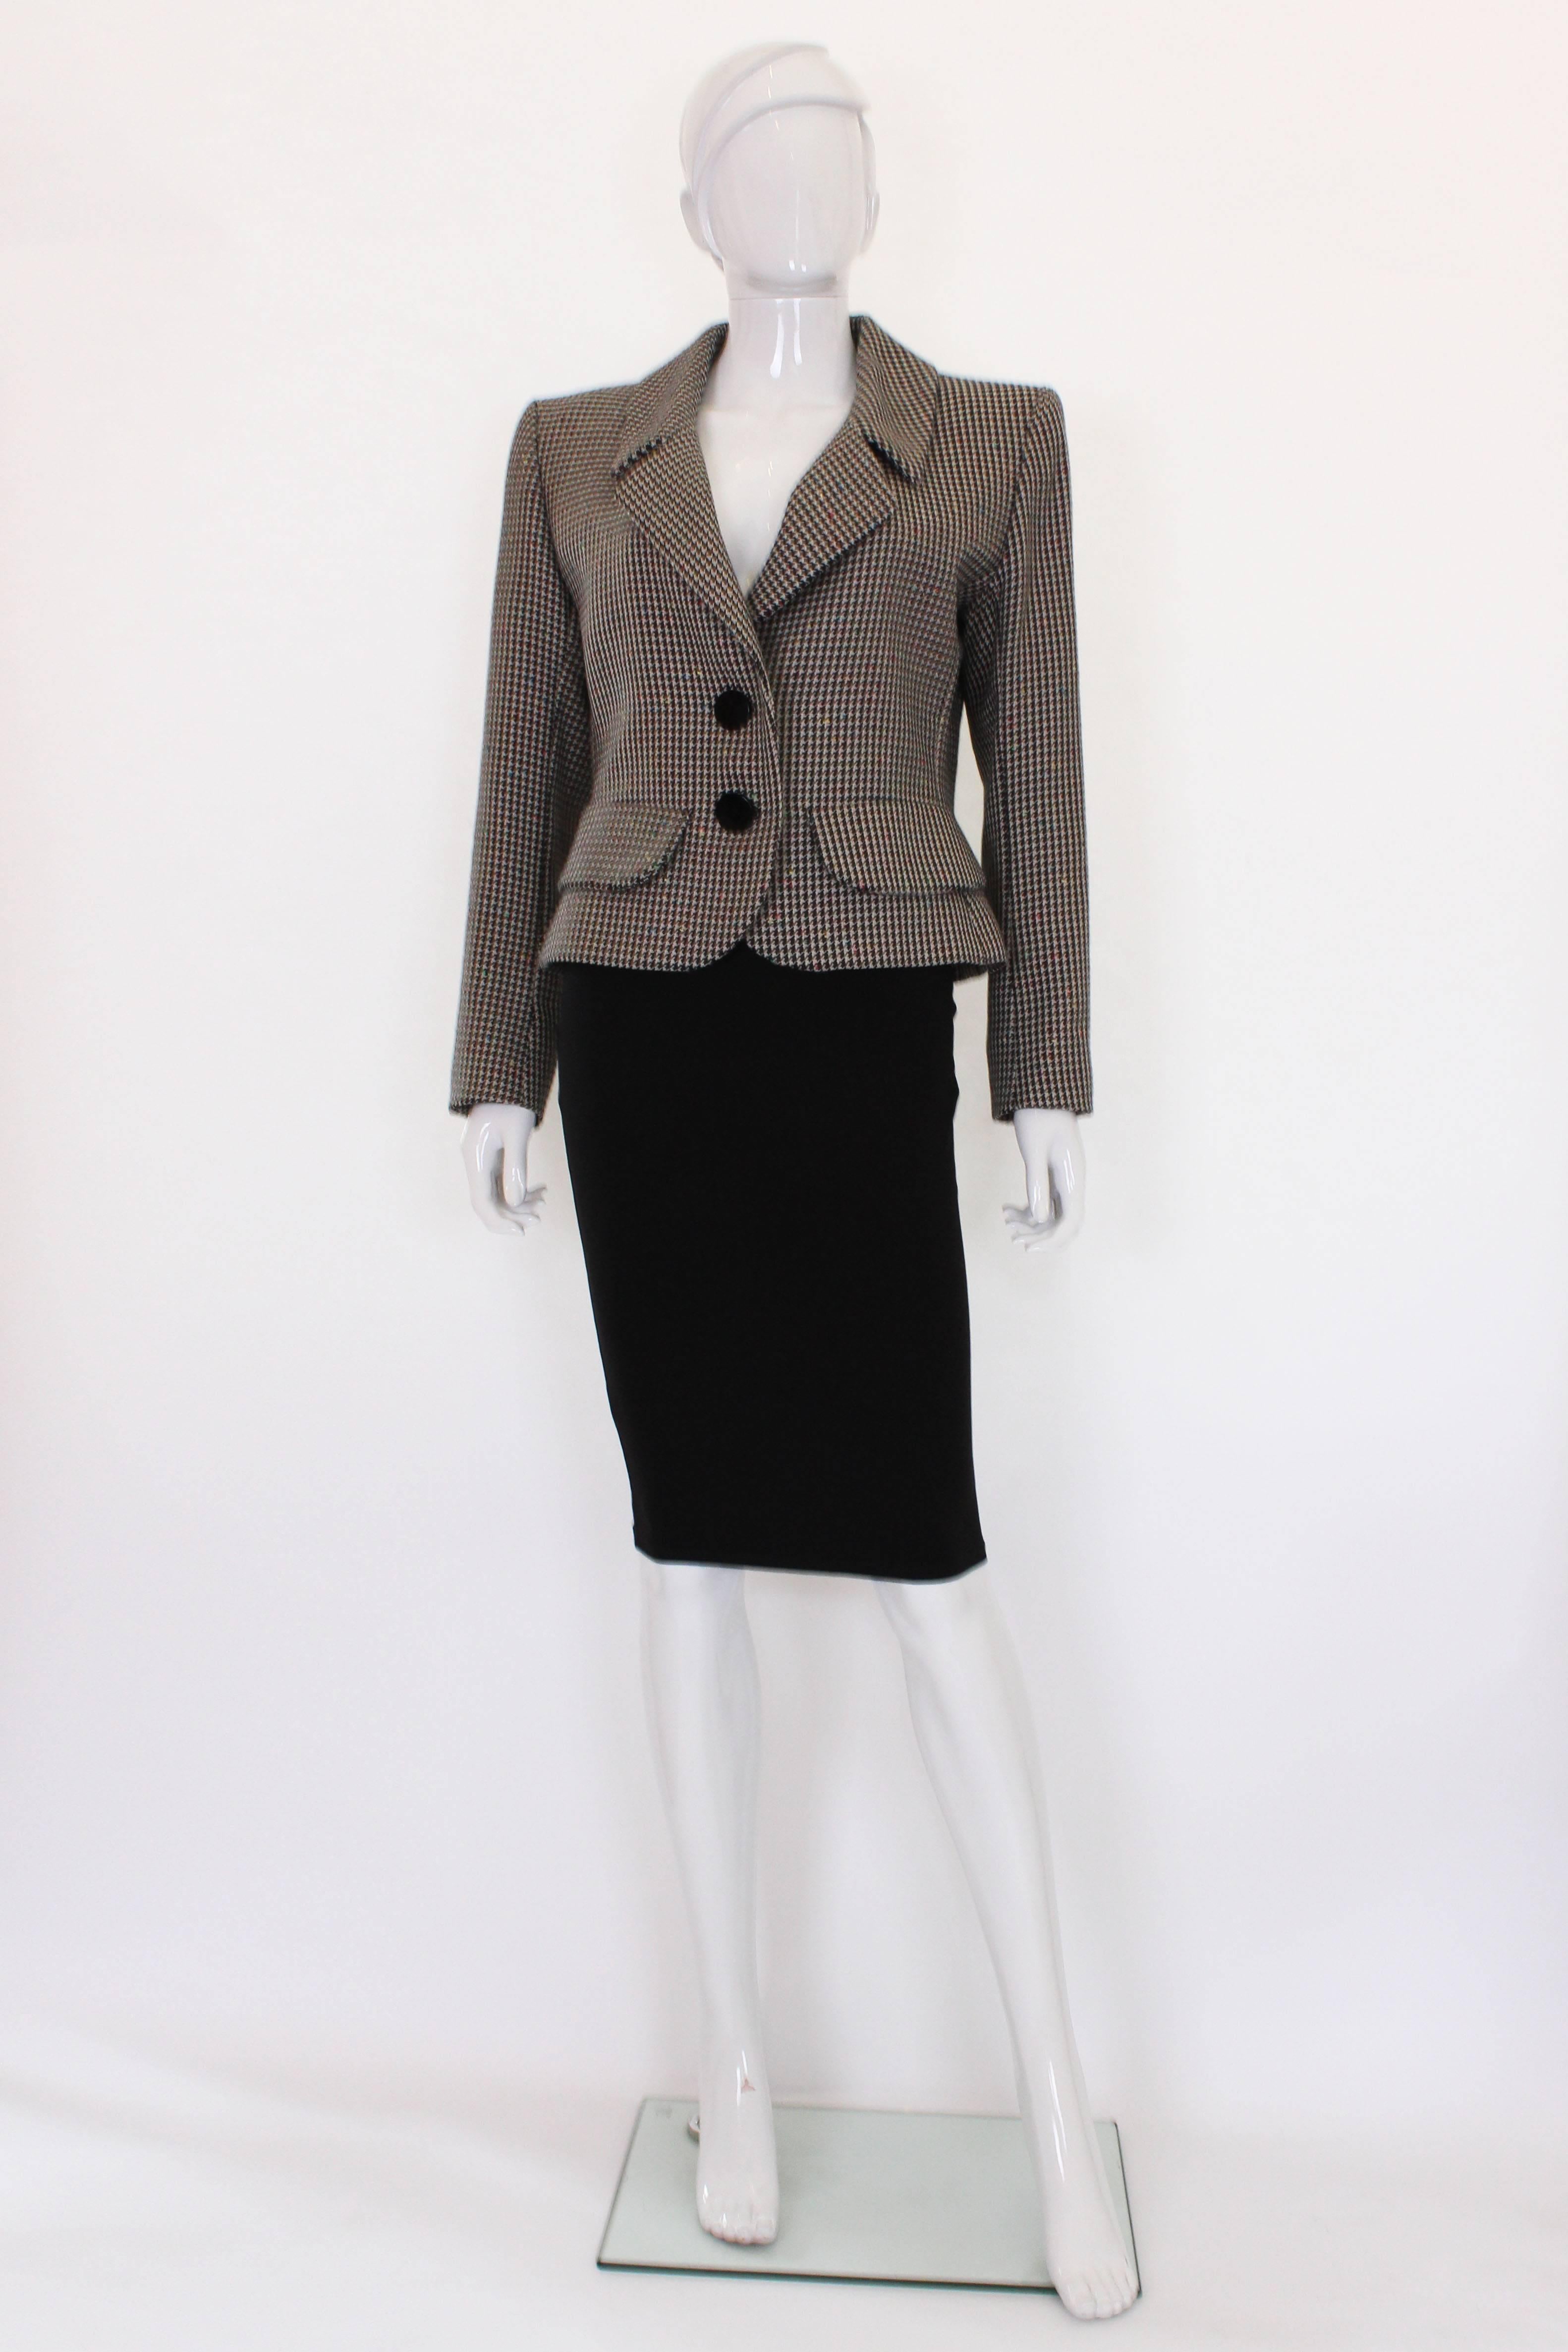 A chic houndstooth blazer by French designer Yves Saint Laurent, Variation range. This jacket has a white background with a black houndstooth design, and spots of colour, red, pink,  yellow green, and blue .It has elegant lapels, 2 false pockets on